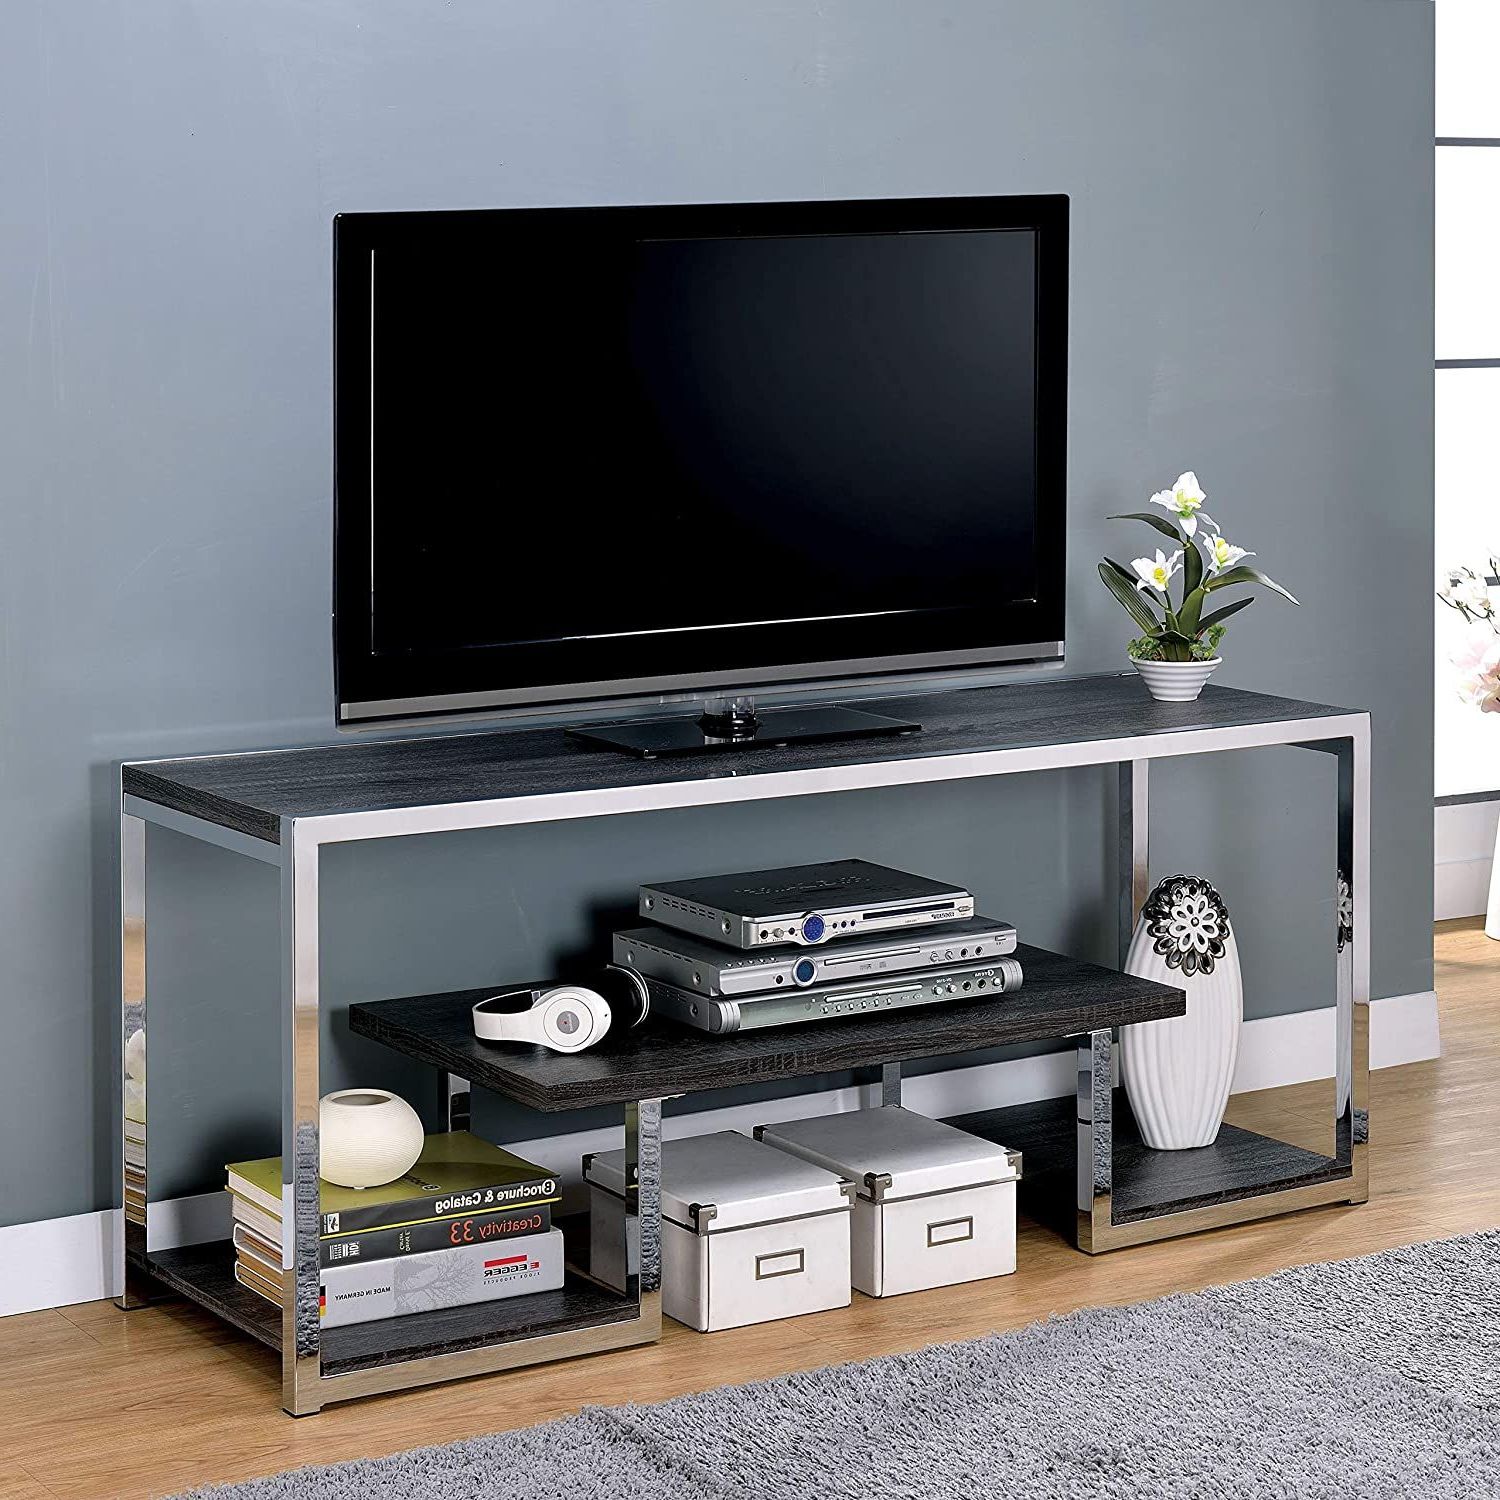 Fashionable Contemporary 60 Inch Metal 3 Shelf Tv Stand – 72 Inches Silver Casual With Regard To Modern Stands With Shelves (View 10 of 15)